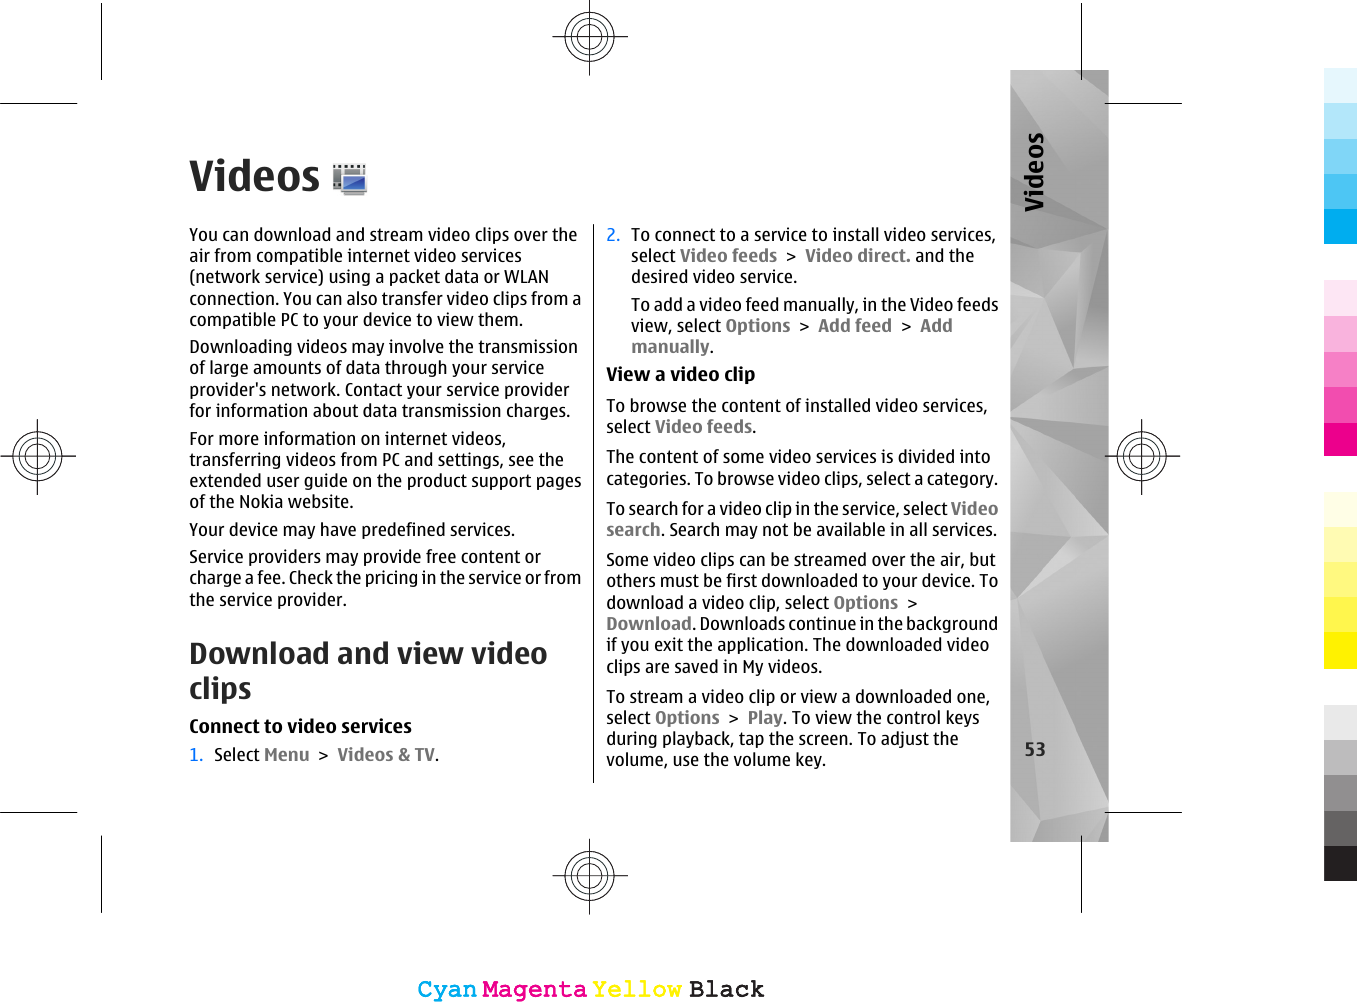 VideosYou can download and stream video clips over theair from compatible internet video services(network service) using a packet data or WLANconnection. You can also transfer video clips from acompatible PC to your device to view them.Downloading videos may involve the transmissionof large amounts of data through your serviceprovider&apos;s network. Contact your service providerfor information about data transmission charges.For more information on internet videos,transferring videos from PC and settings, see theextended user guide on the product support pagesof the Nokia website.Your device may have predefined services.Service providers may provide free content orcharge a fee. Check the pricing in the service or fromthe service provider.Download and view videoclipsConnect to video services1. Select Menu &gt; Videos &amp; TV.2. To connect to a service to install video services,select Video feeds &gt; Video direct. and thedesired video service.To add a video feed manually, in the Video feedsview, select Options &gt; Add feed &gt; Addmanually.View a video clipTo browse the content of installed video services,select Video feeds.The content of some video services is divided intocategories. To browse video clips, select a category.To search for a video clip in the service, select Videosearch. Search may not be available in all services.Some video clips can be streamed over the air, butothers must be first downloaded to your device. Todownload a video clip, select Options &gt;Download. Downloads continue in the backgroundif you exit the application. The downloaded videoclips are saved in My videos.To stream a video clip or view a downloaded one,select Options &gt; Play. To view the control keysduring playback, tap the screen. To adjust thevolume, use the volume key. 53VideosCyanCyanMagentaMagentaYellowYellowBlackBlackCyanCyanMagentaMagentaYellowYellowBlackBlack